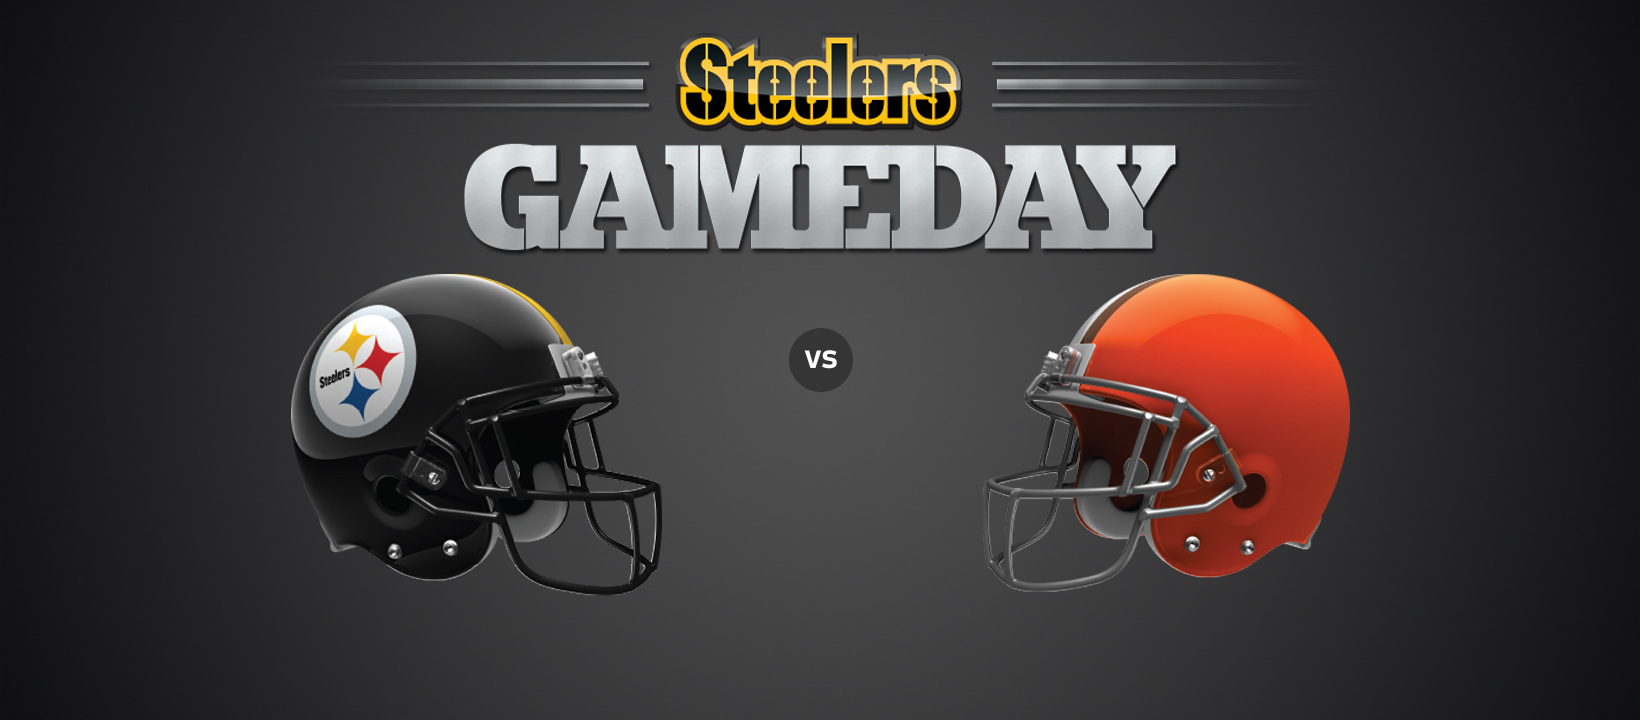 steelers vs cleveland game